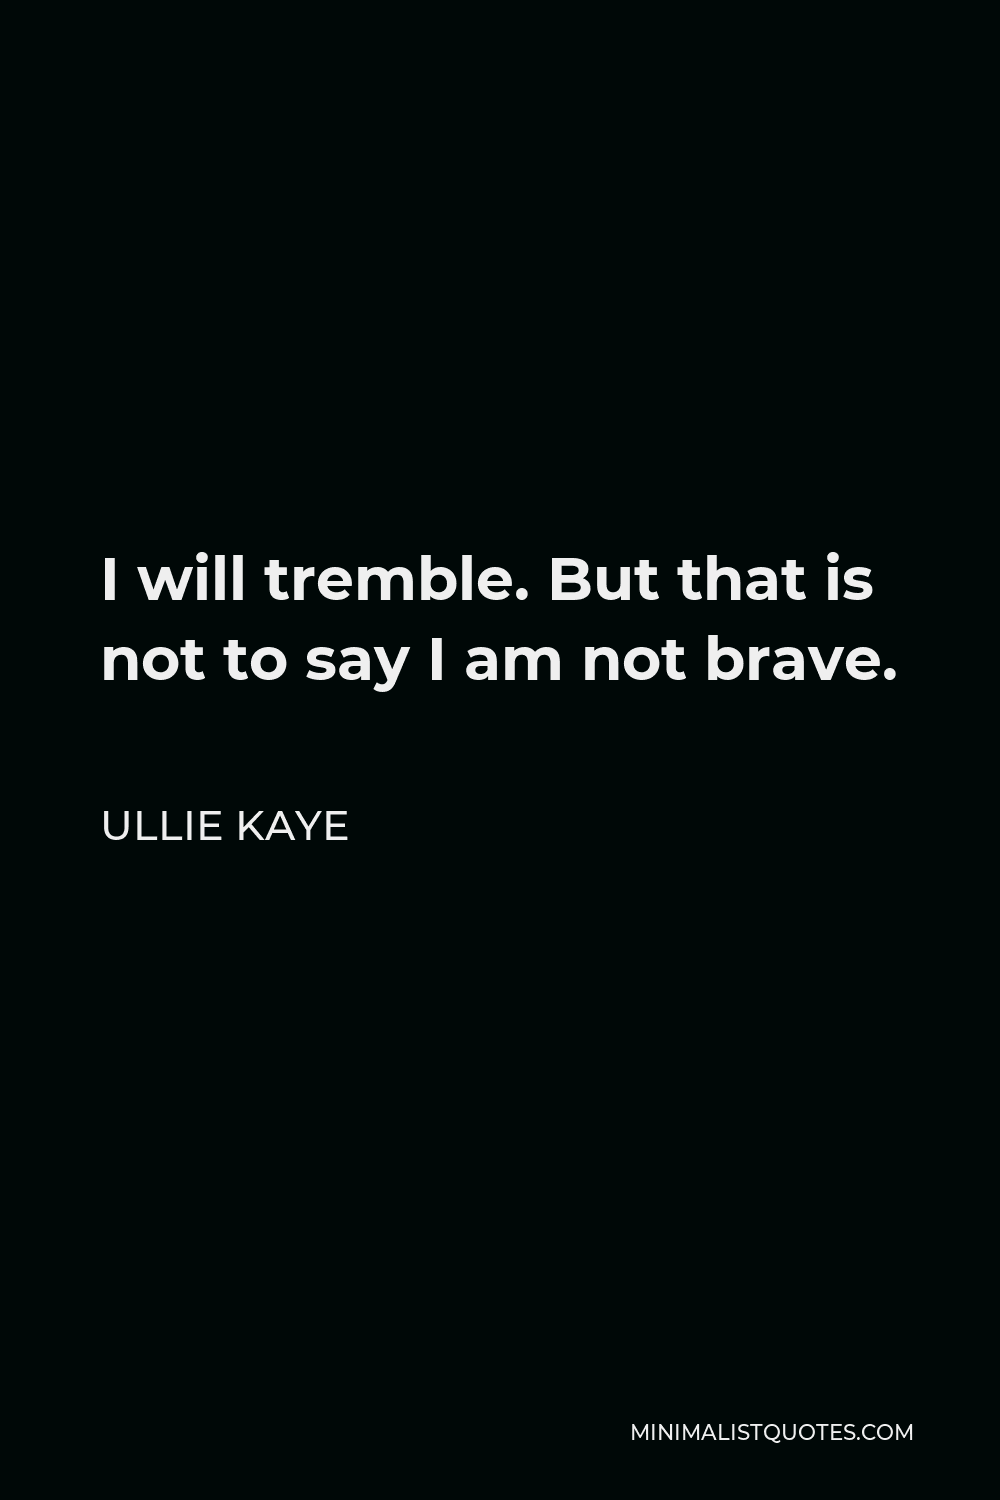 Ullie Kaye Quote - I will tremble. But that is not to say I am not brave.